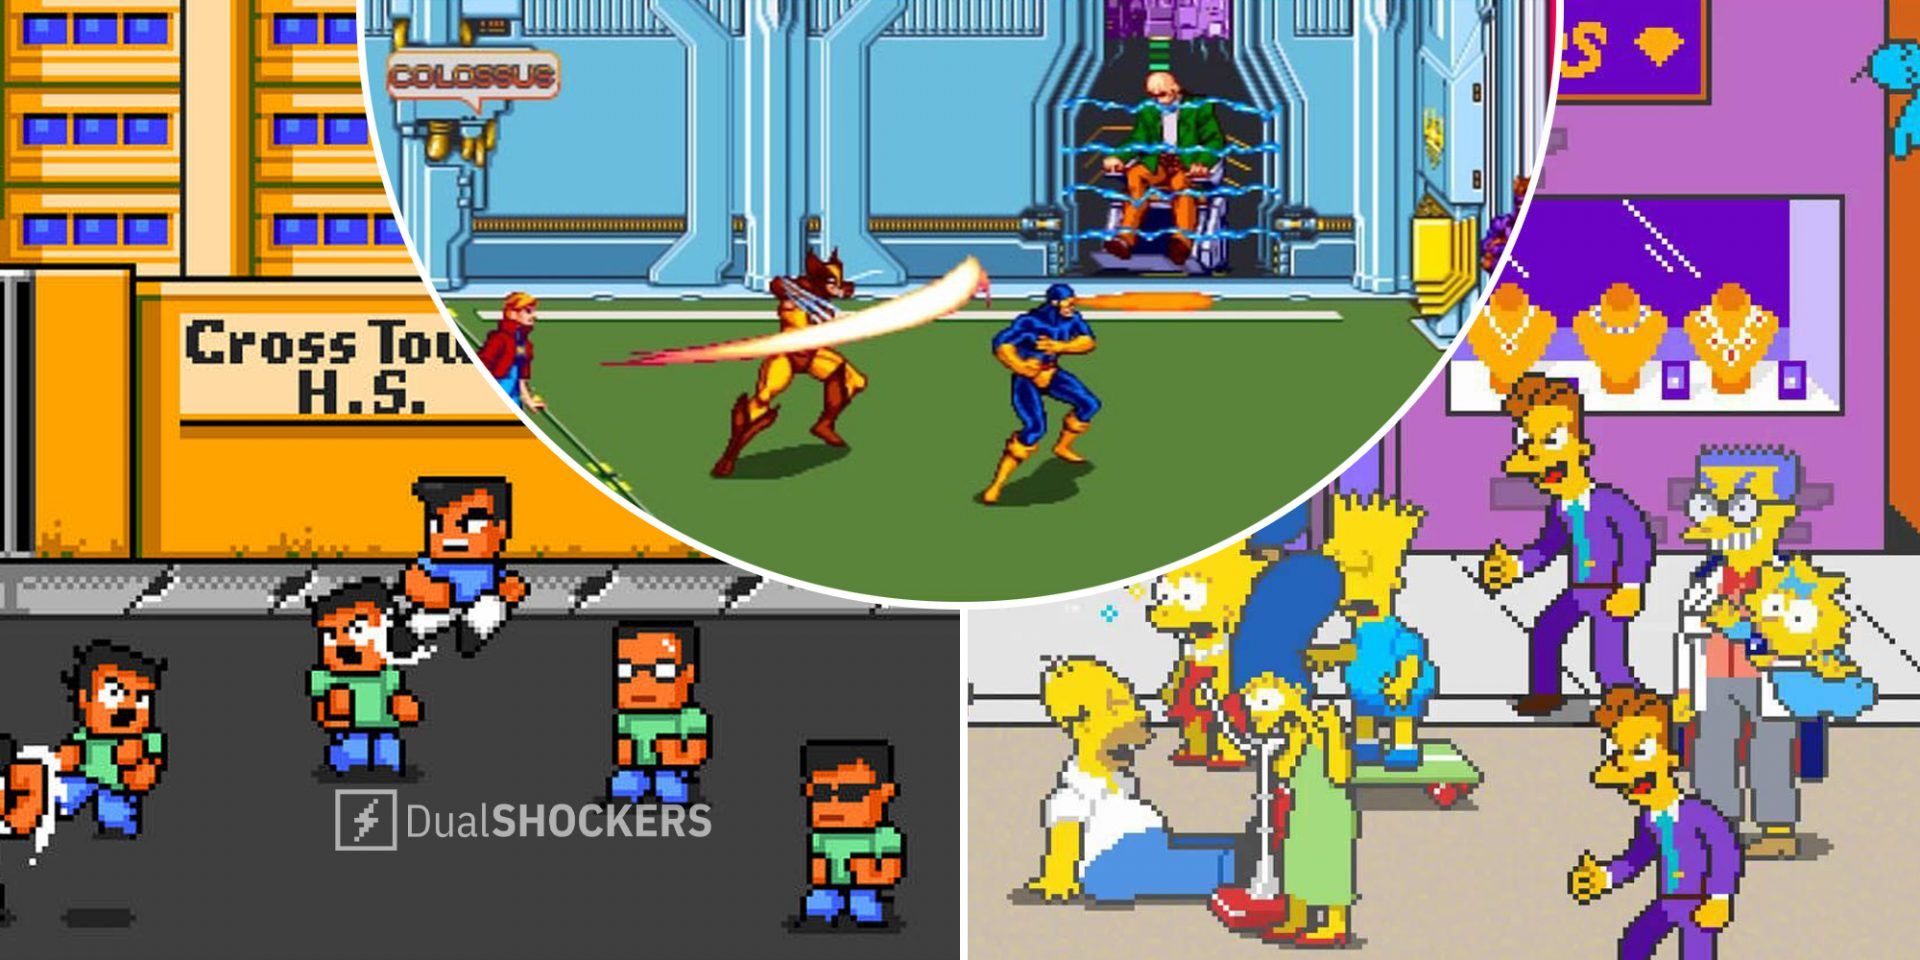 River City Ransom on left, X-Men The Arcade Game in middle, The Simpsons Arcade Game on right